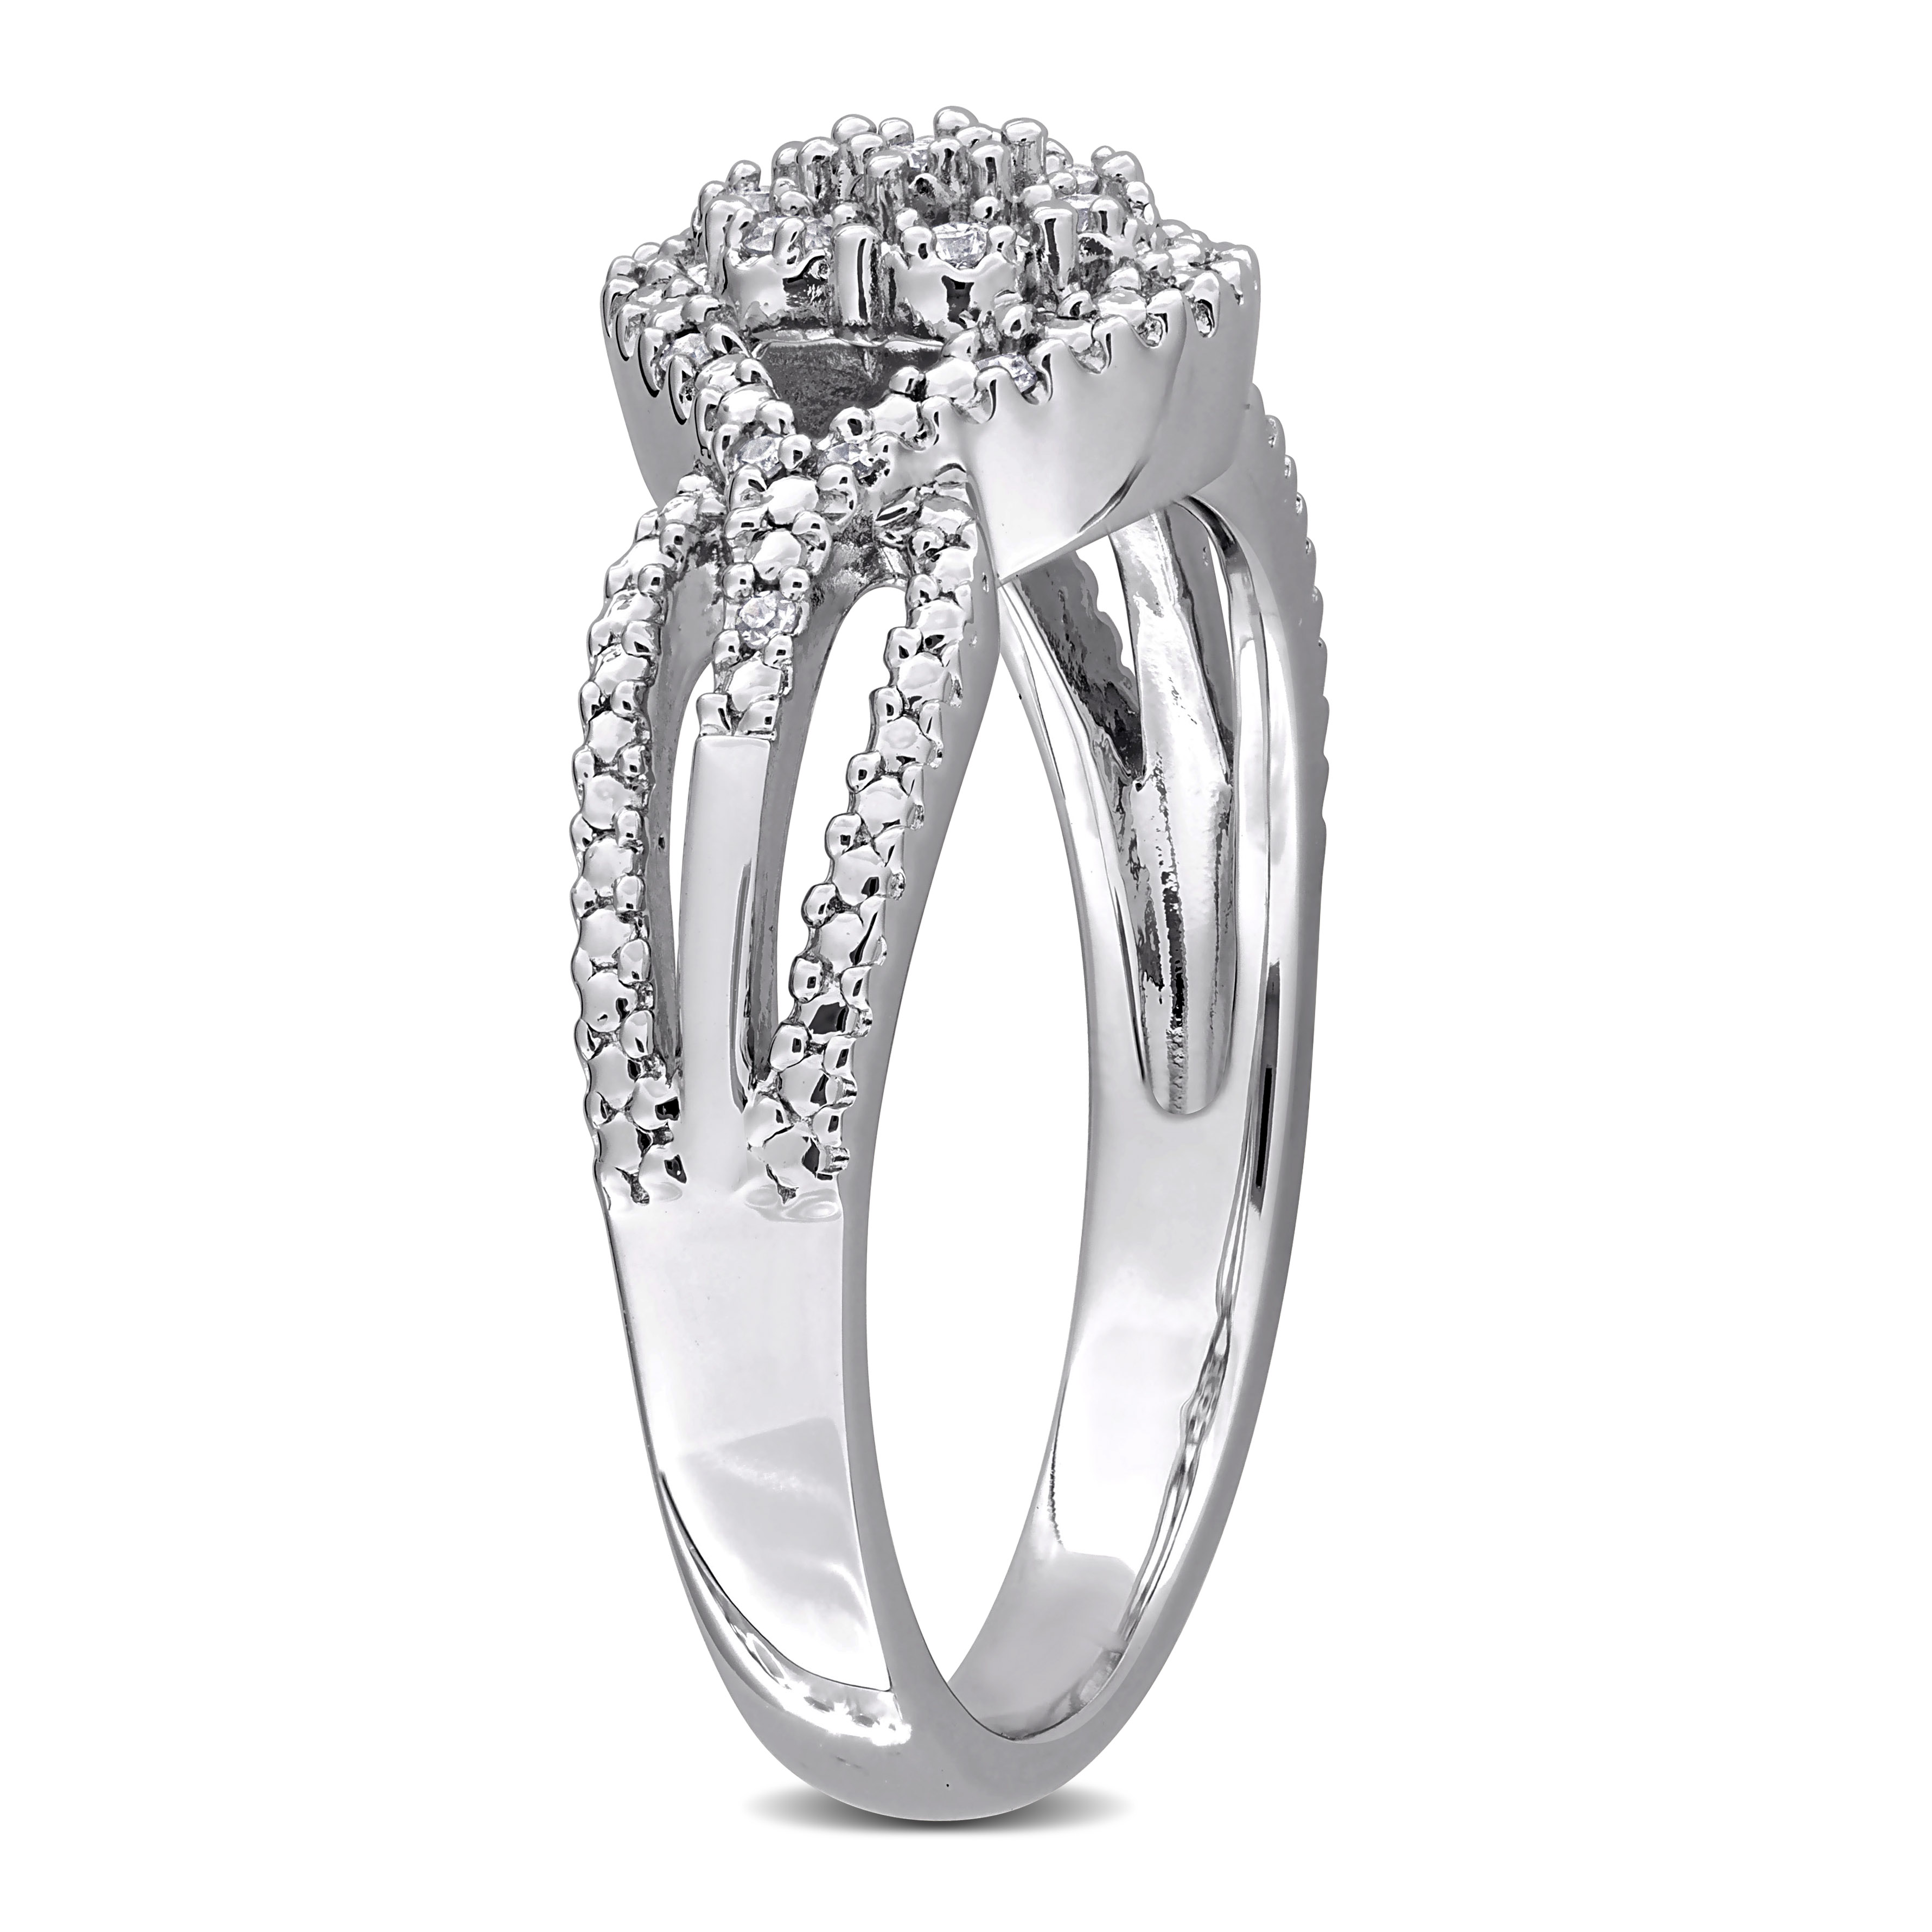 1/10 CT TDW Diamond Floral Cluster Ring in Sterling Silver